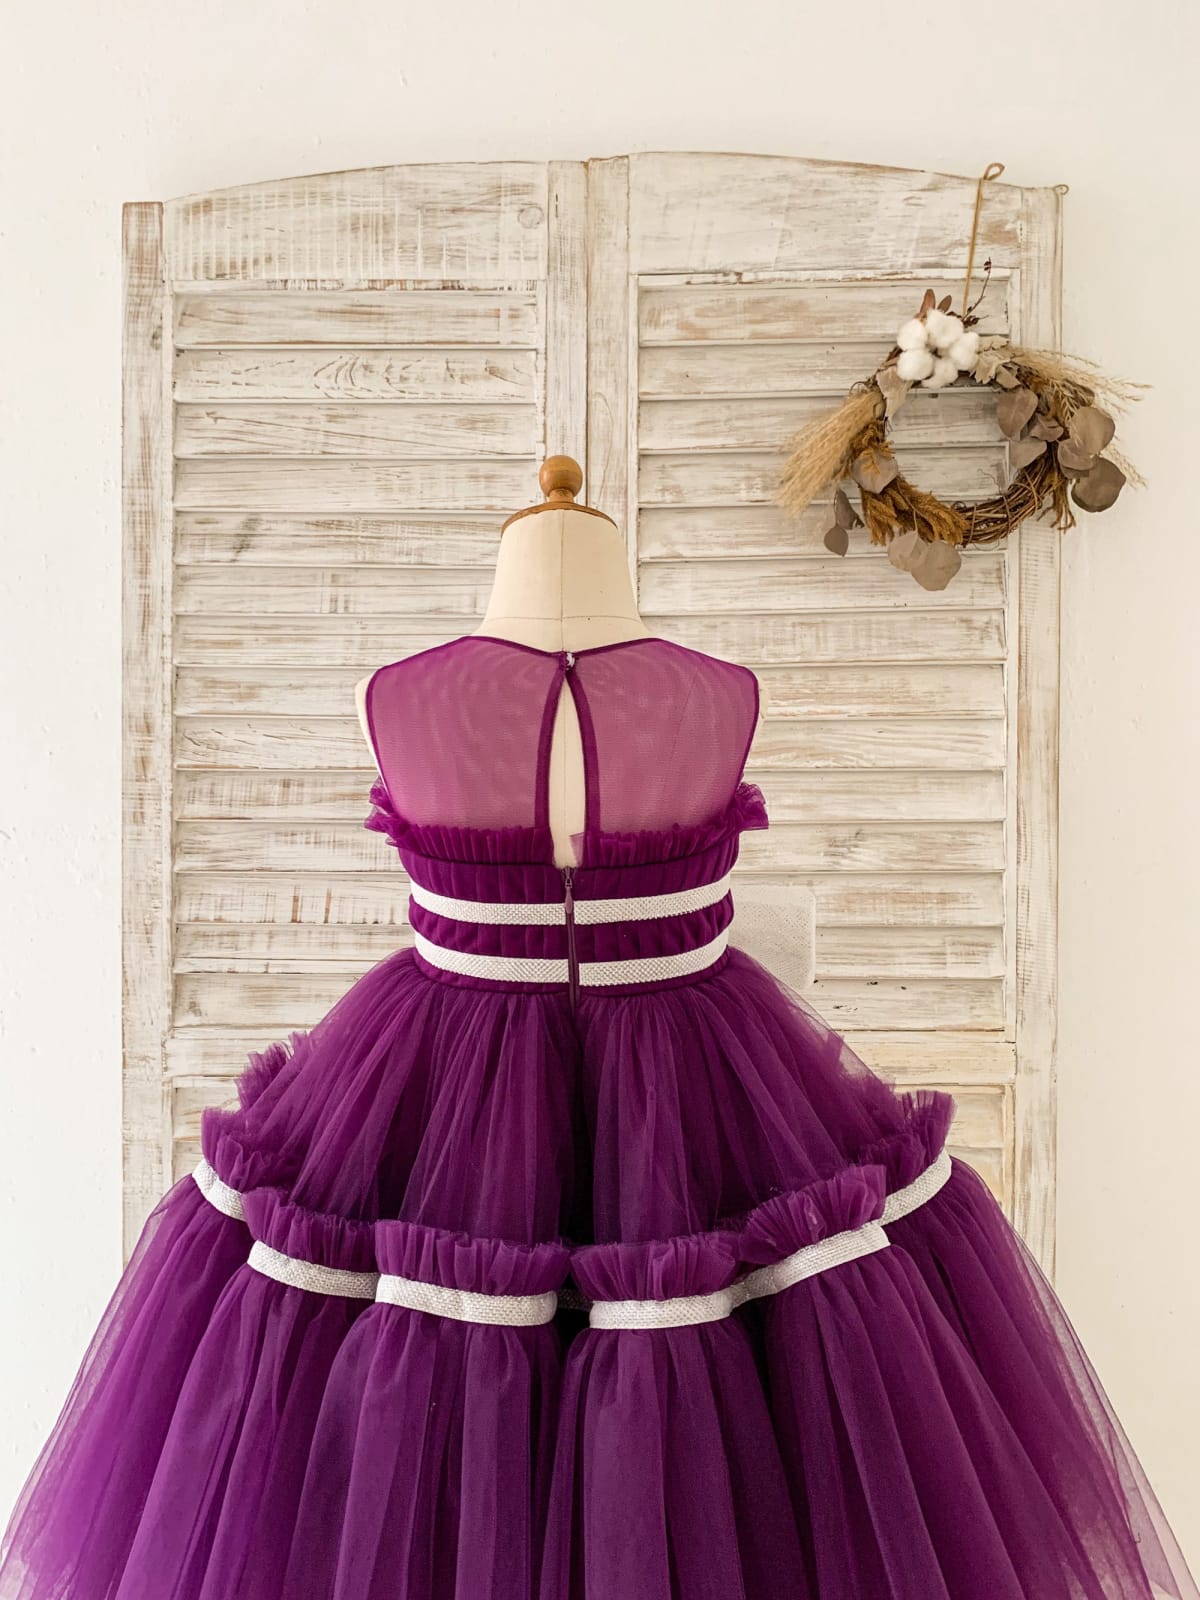 Princess Sheer Neck Pleated Purple Tulle Wedding Flower Girl Dress Kids Party, Bow